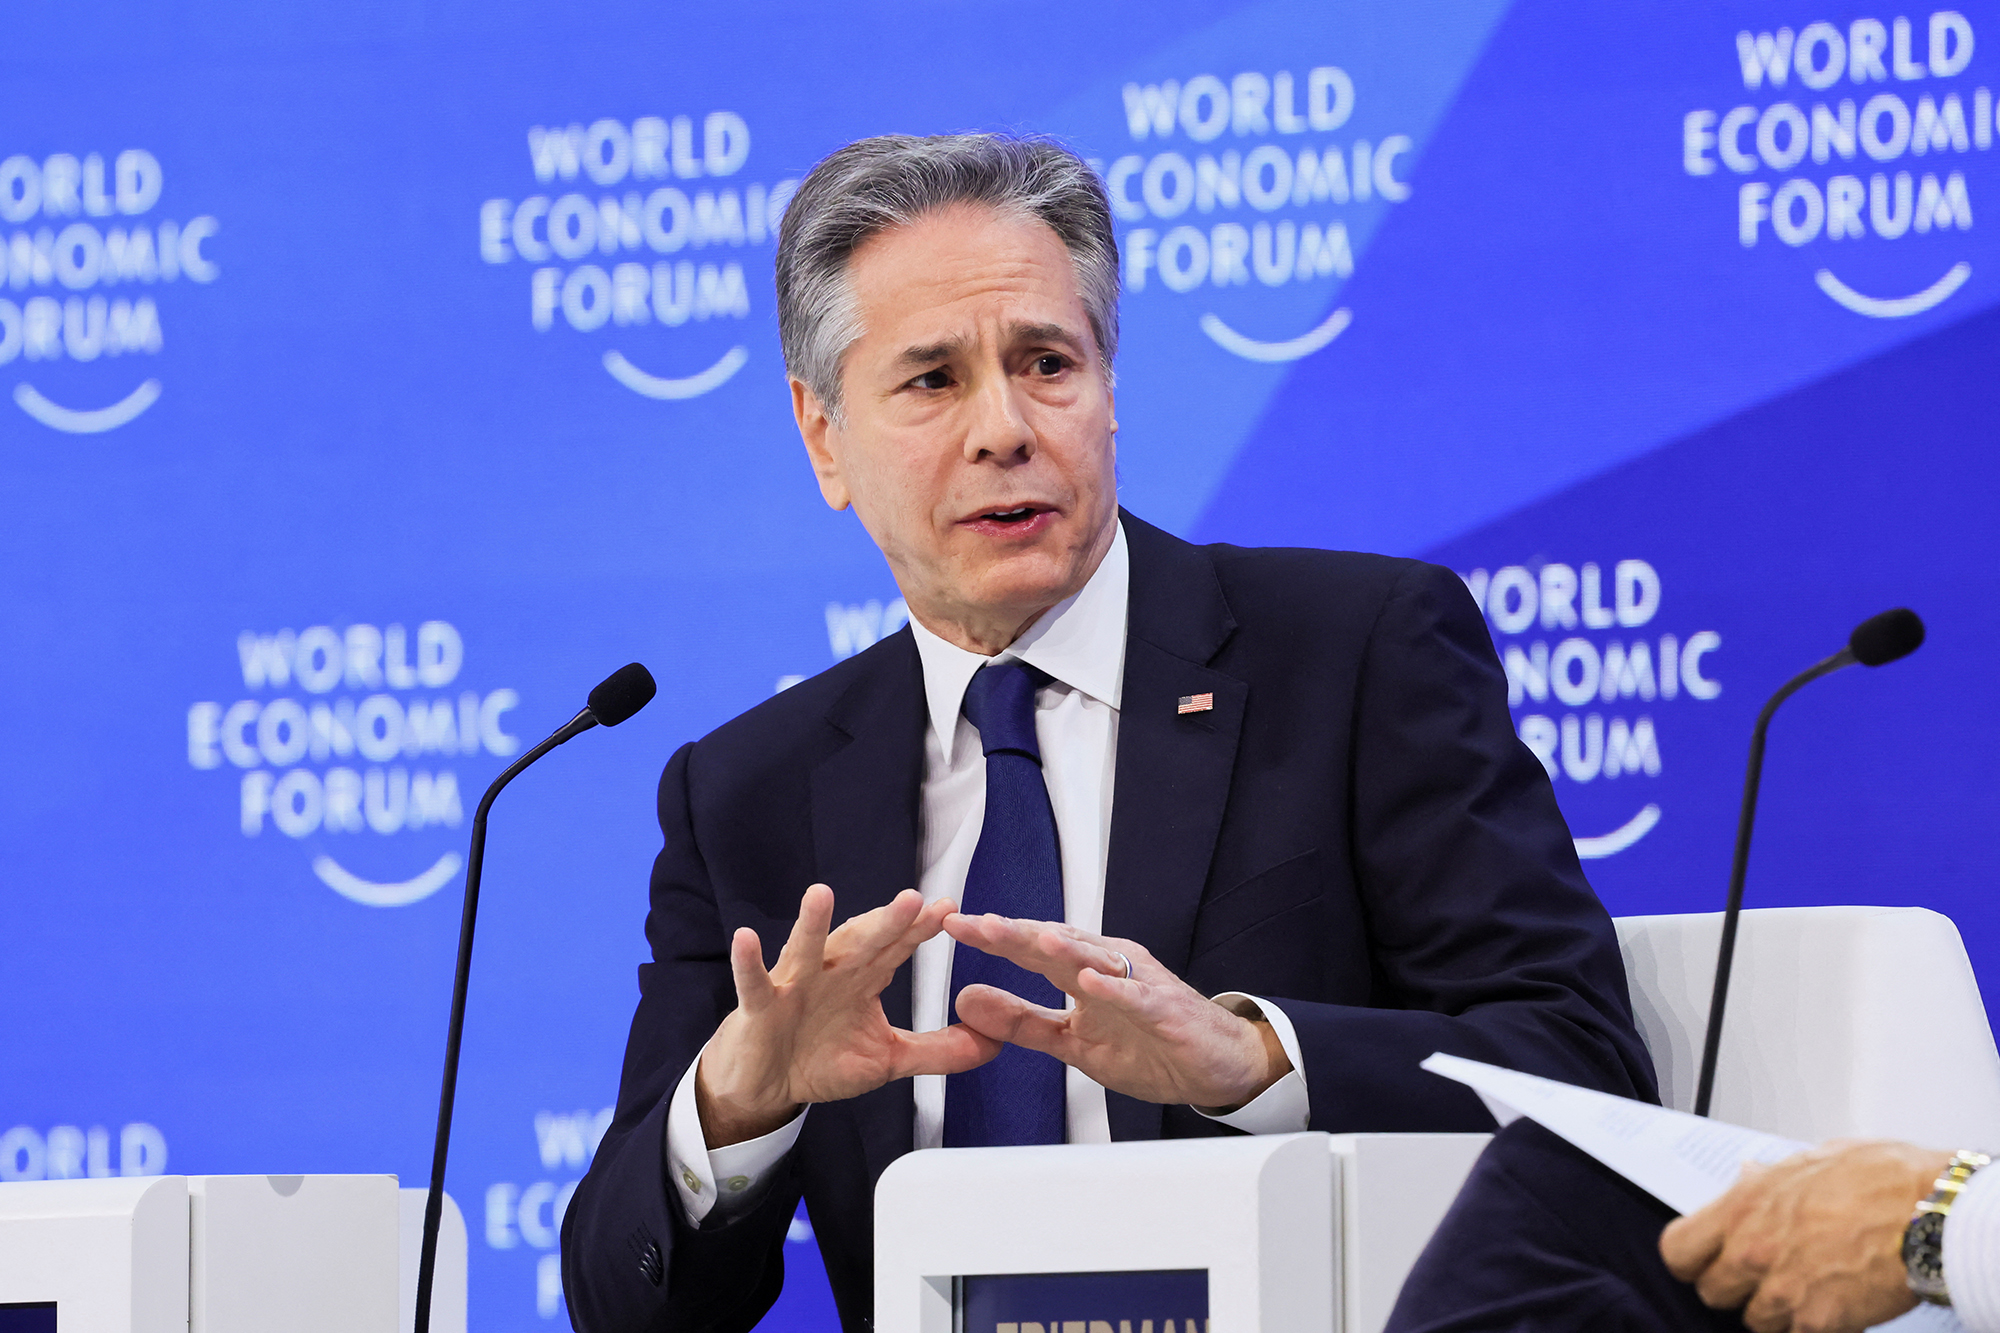 U.S. Secretary of State Antony Blinken attends the 54th annual meeting of the World Economic Forum in Davos, Switzerland, on January 17.